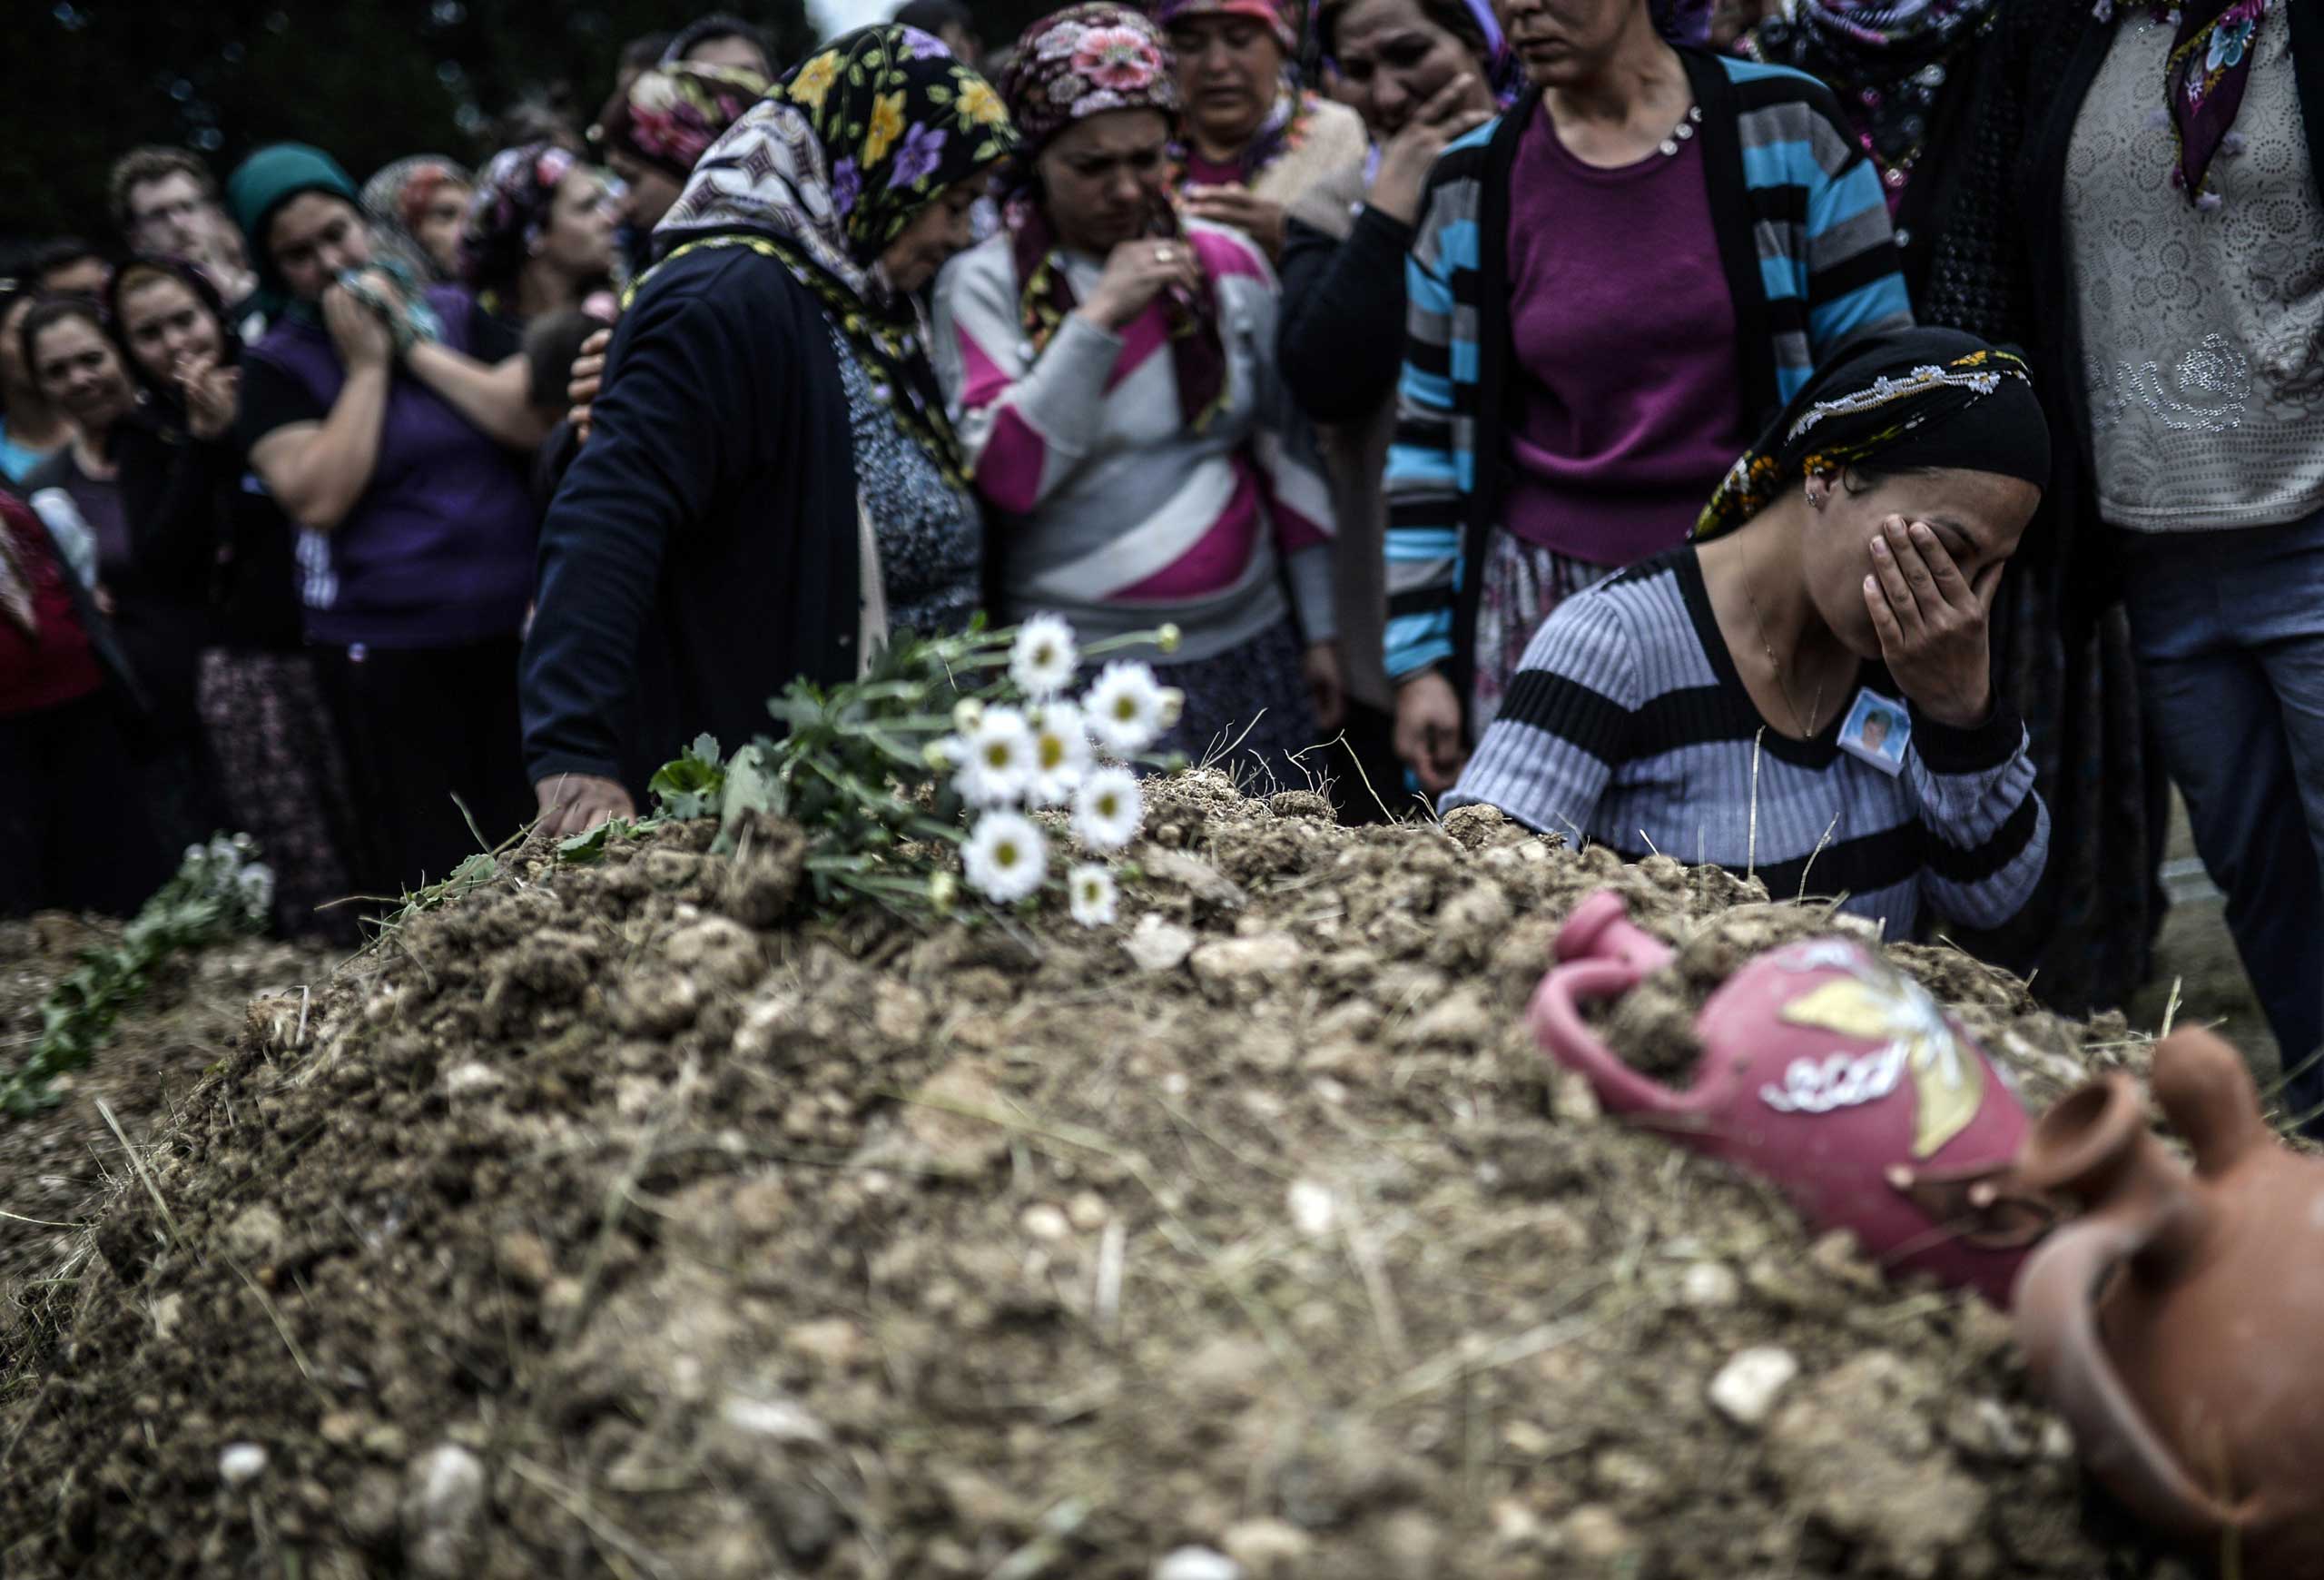 Duygu Colak, reacts as she sits in front of her husband Ugur's grave during a funeral ceremony in the western town of Soma in the Manisa province on May 15, 2014.